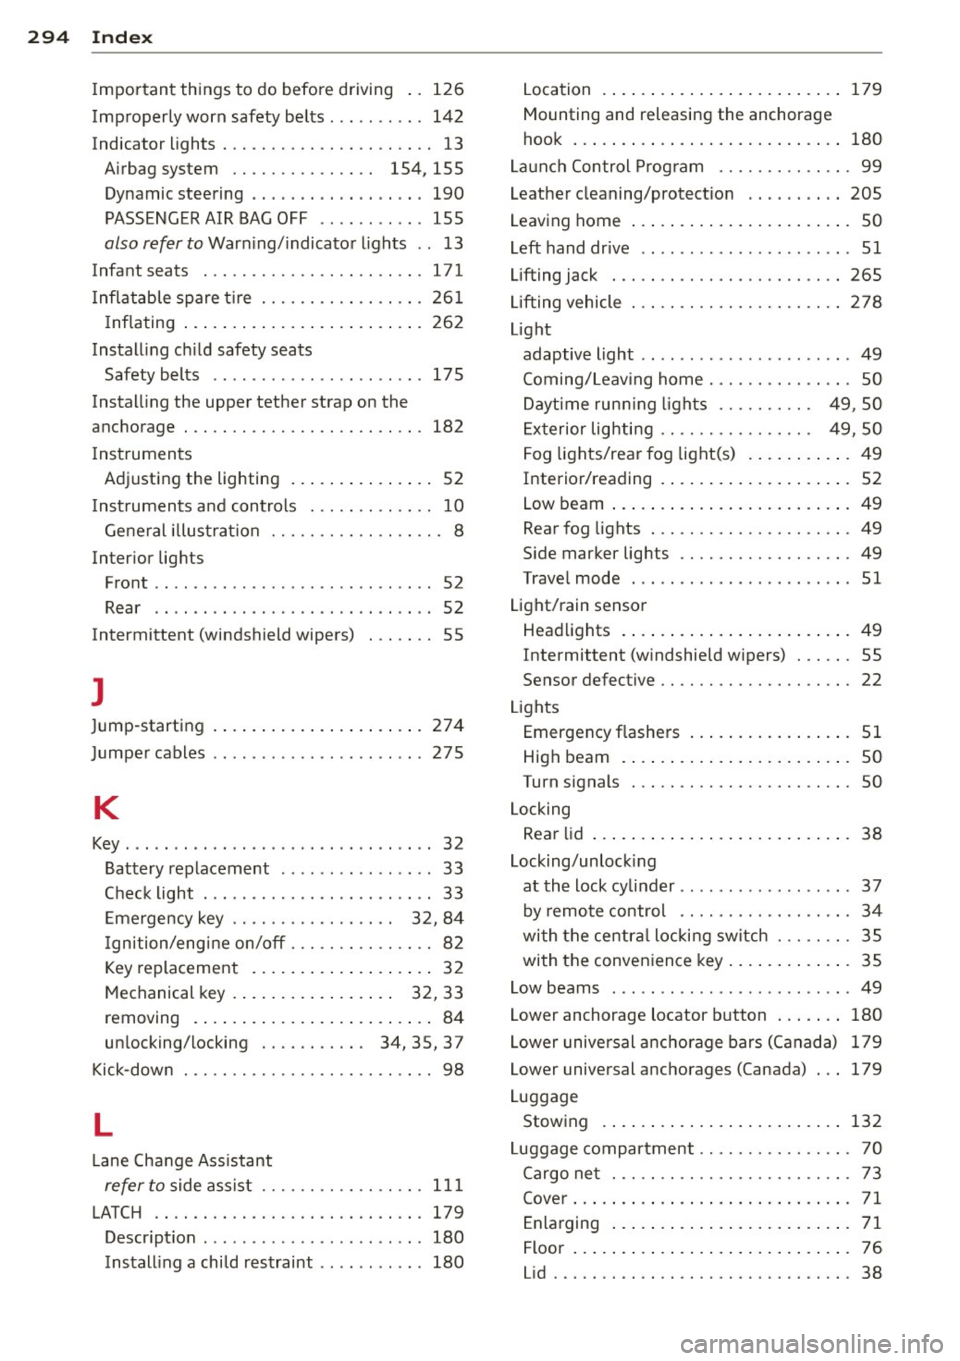 AUDI S4 2015  Owners Manual 294  Index 
Important  things  to  do  before  driving  ..  126 
Improperly  worn  safety  belts  ..... .. ...  142 
Indicator  lights  ............ .. .. .. .. ..  13 
Airbag  system  . . . . . . . .